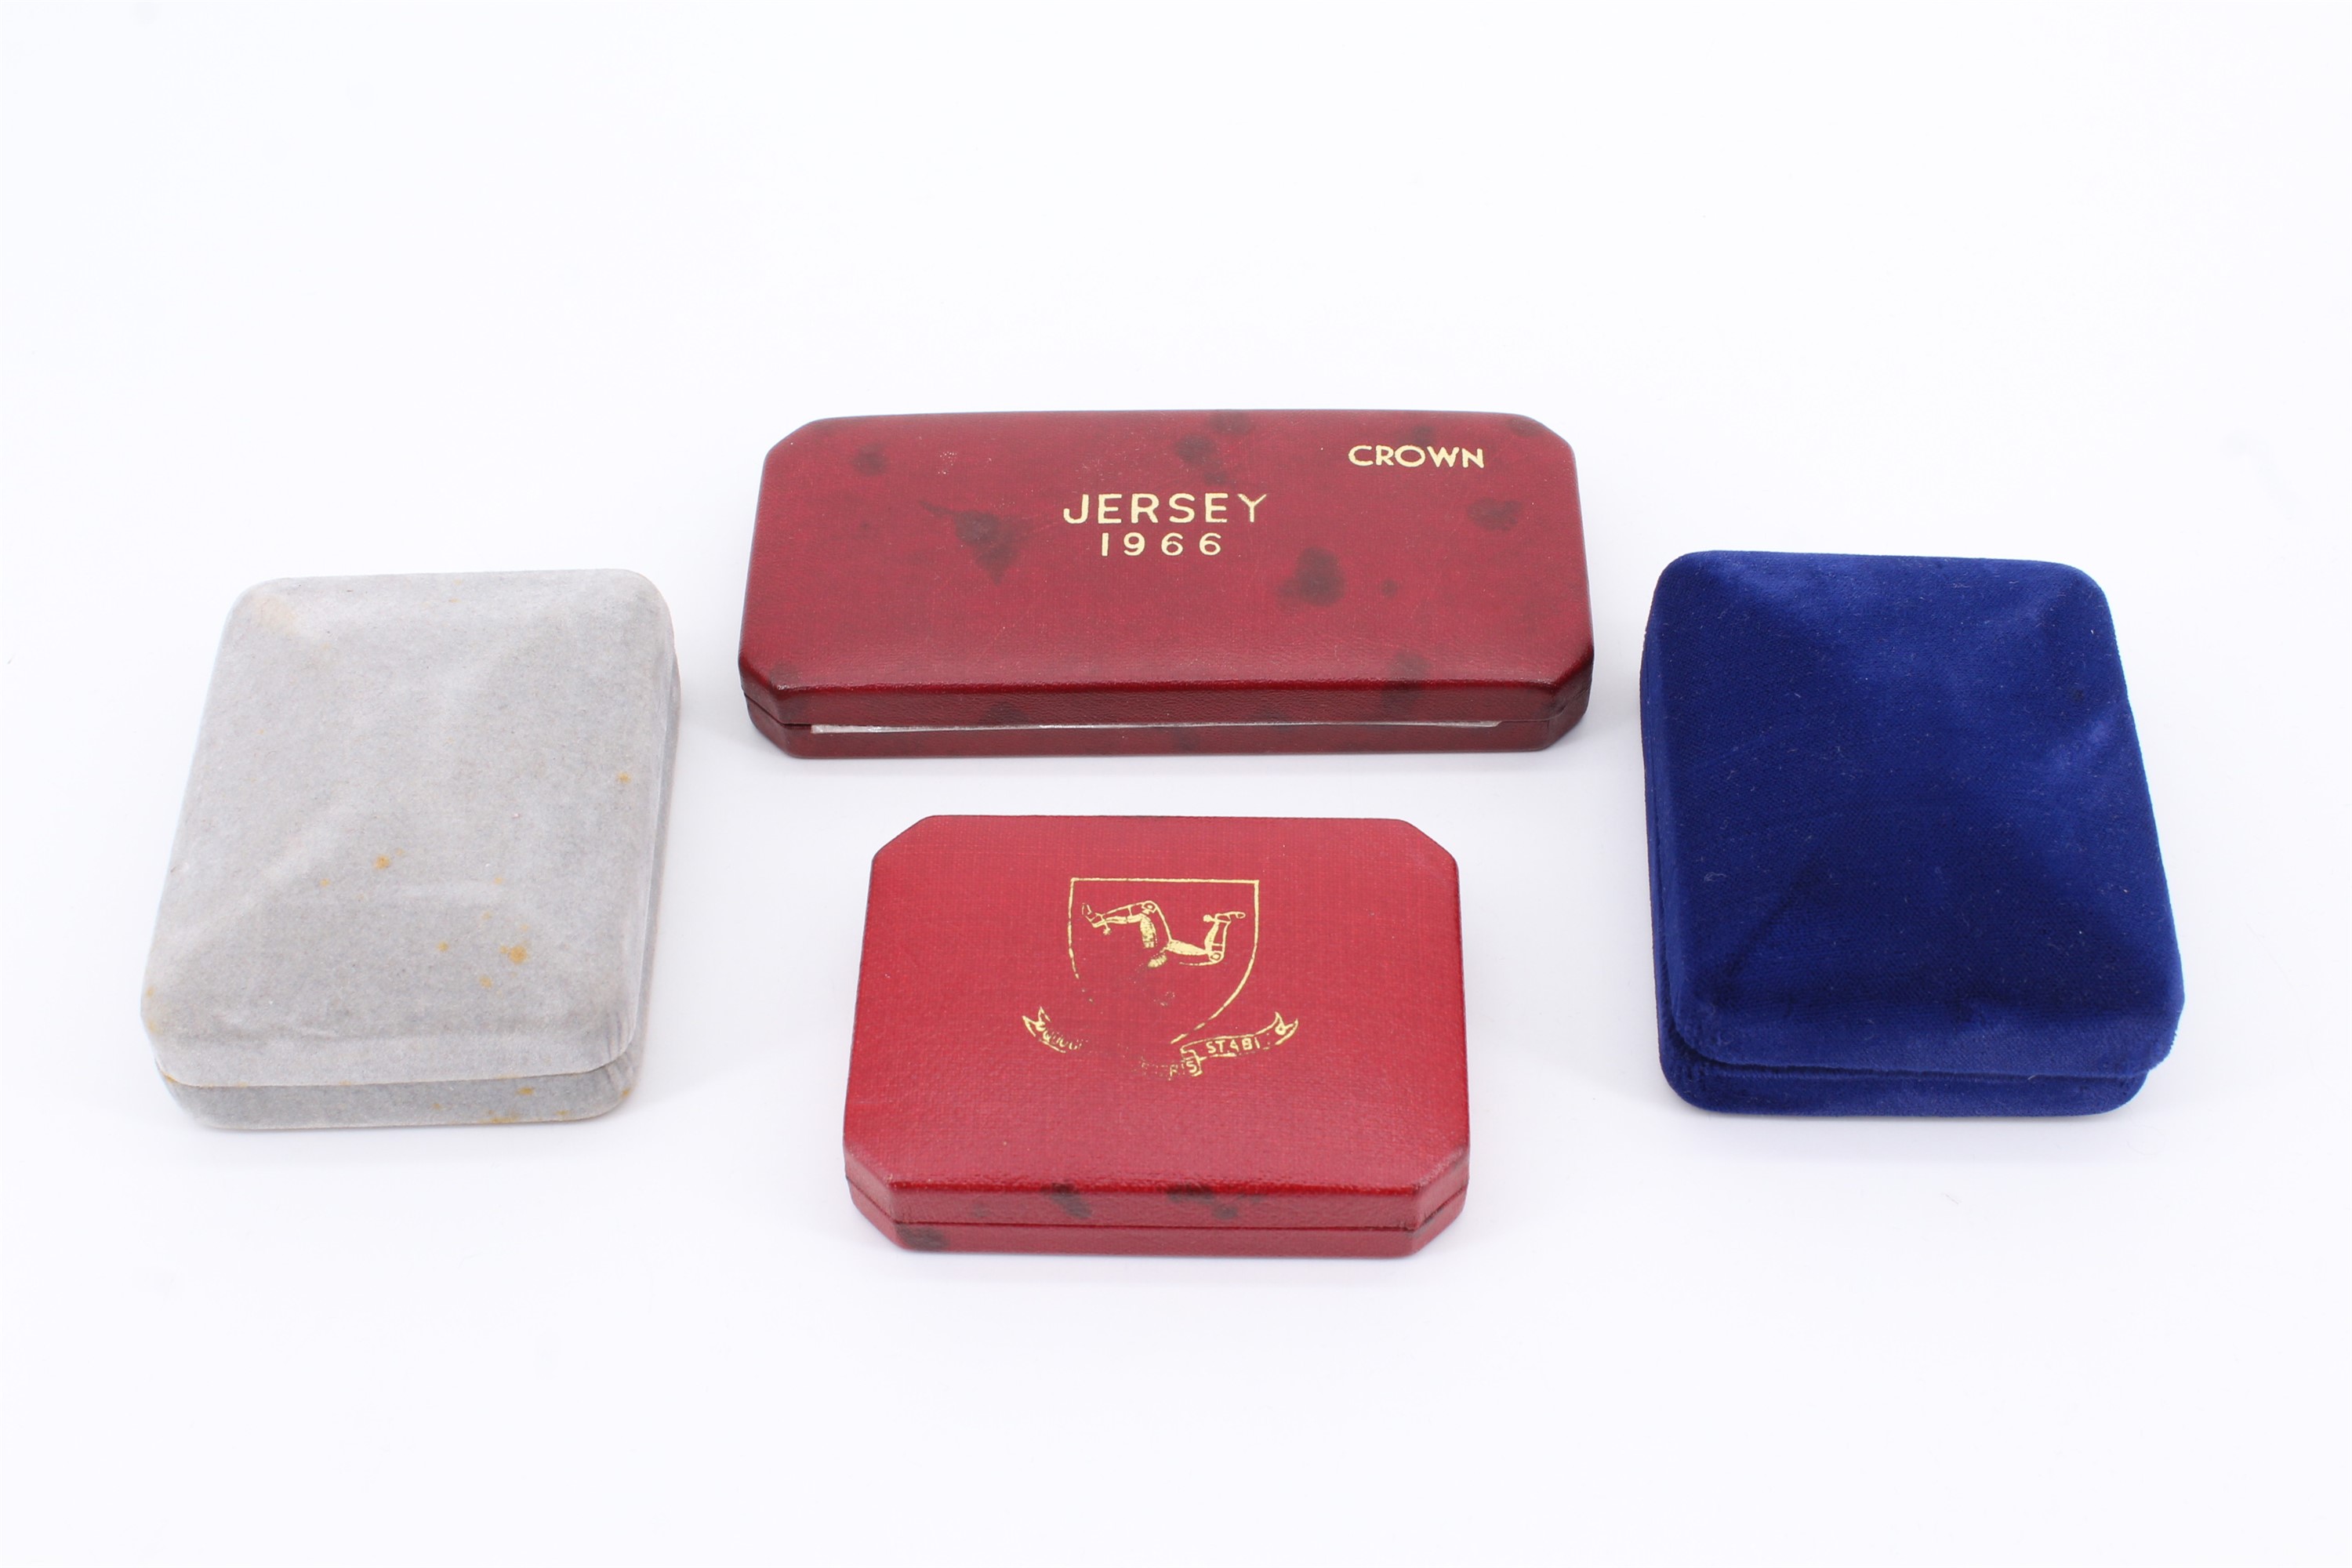 Three cased Pobjoy Mint Isle of Man proof coins together with a Royal Mint 1966 Jersey crown cased - Image 2 of 3